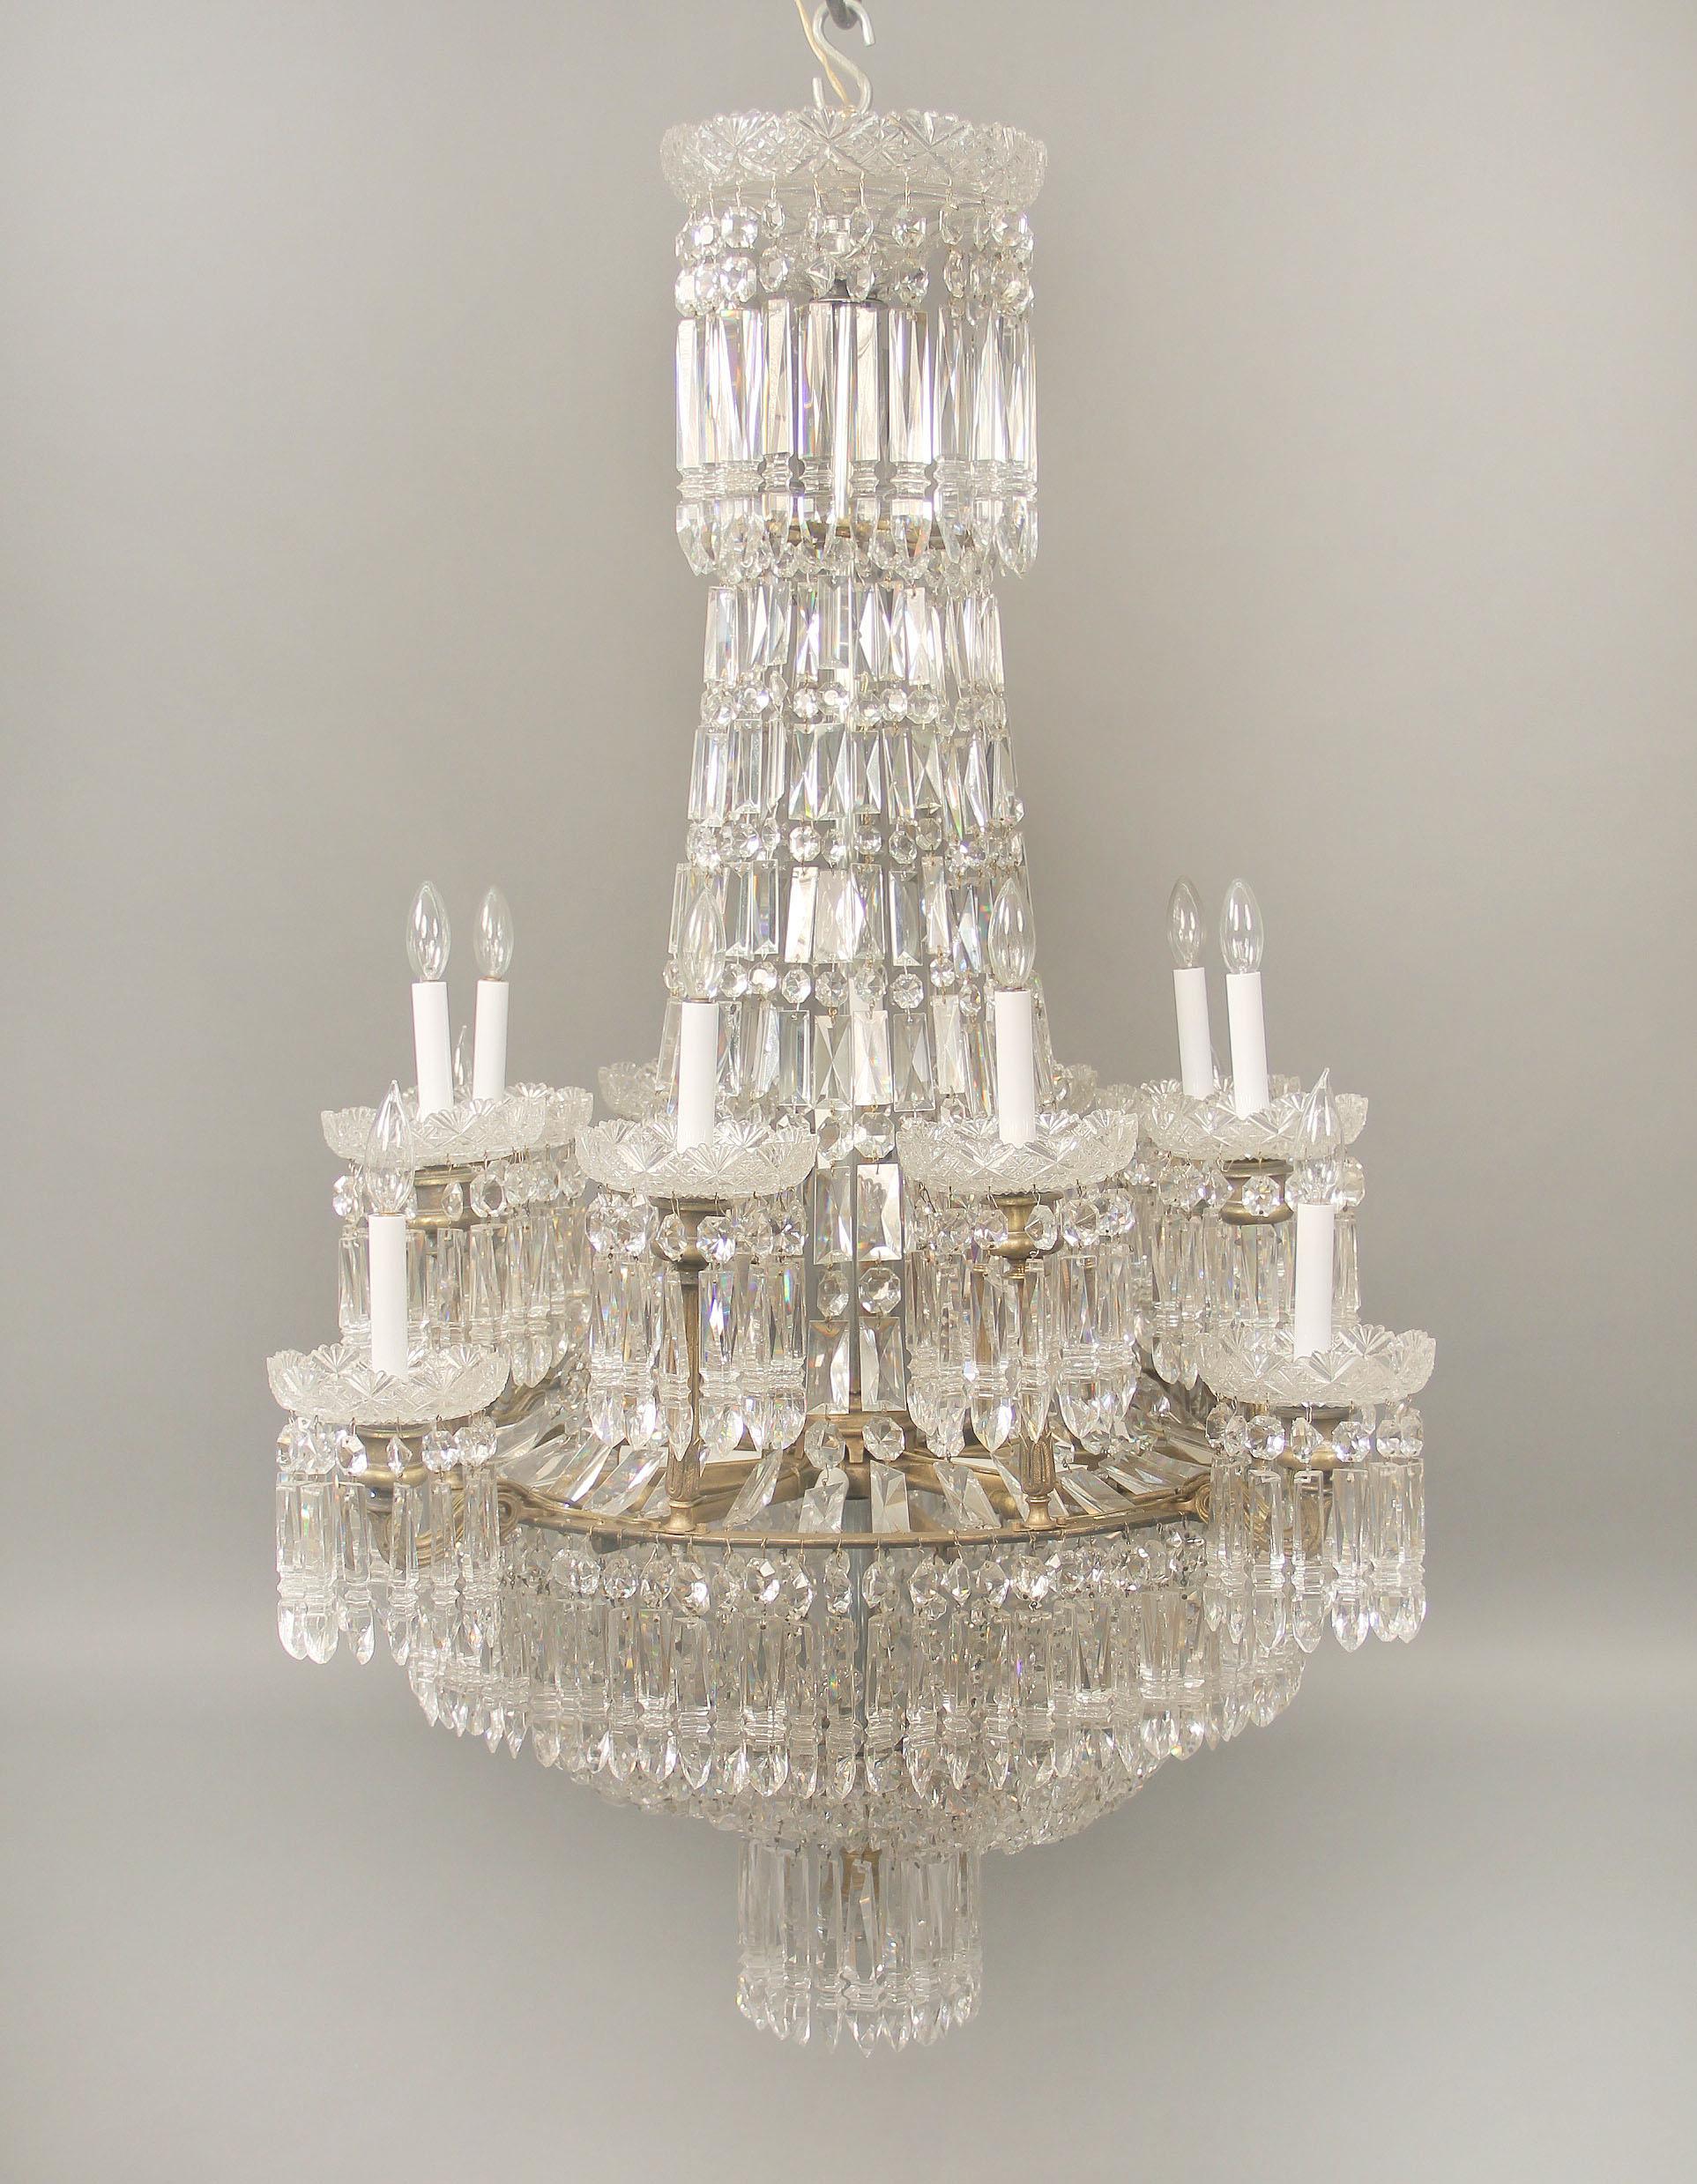 An exceptional early 19th century gilt bronze and Waterford crystal eighteen light chandelier

An etched crown above a crystal string body leading to a beaded basket with drop crystals, each of the twelve tiered perimeter lights with top quality cut